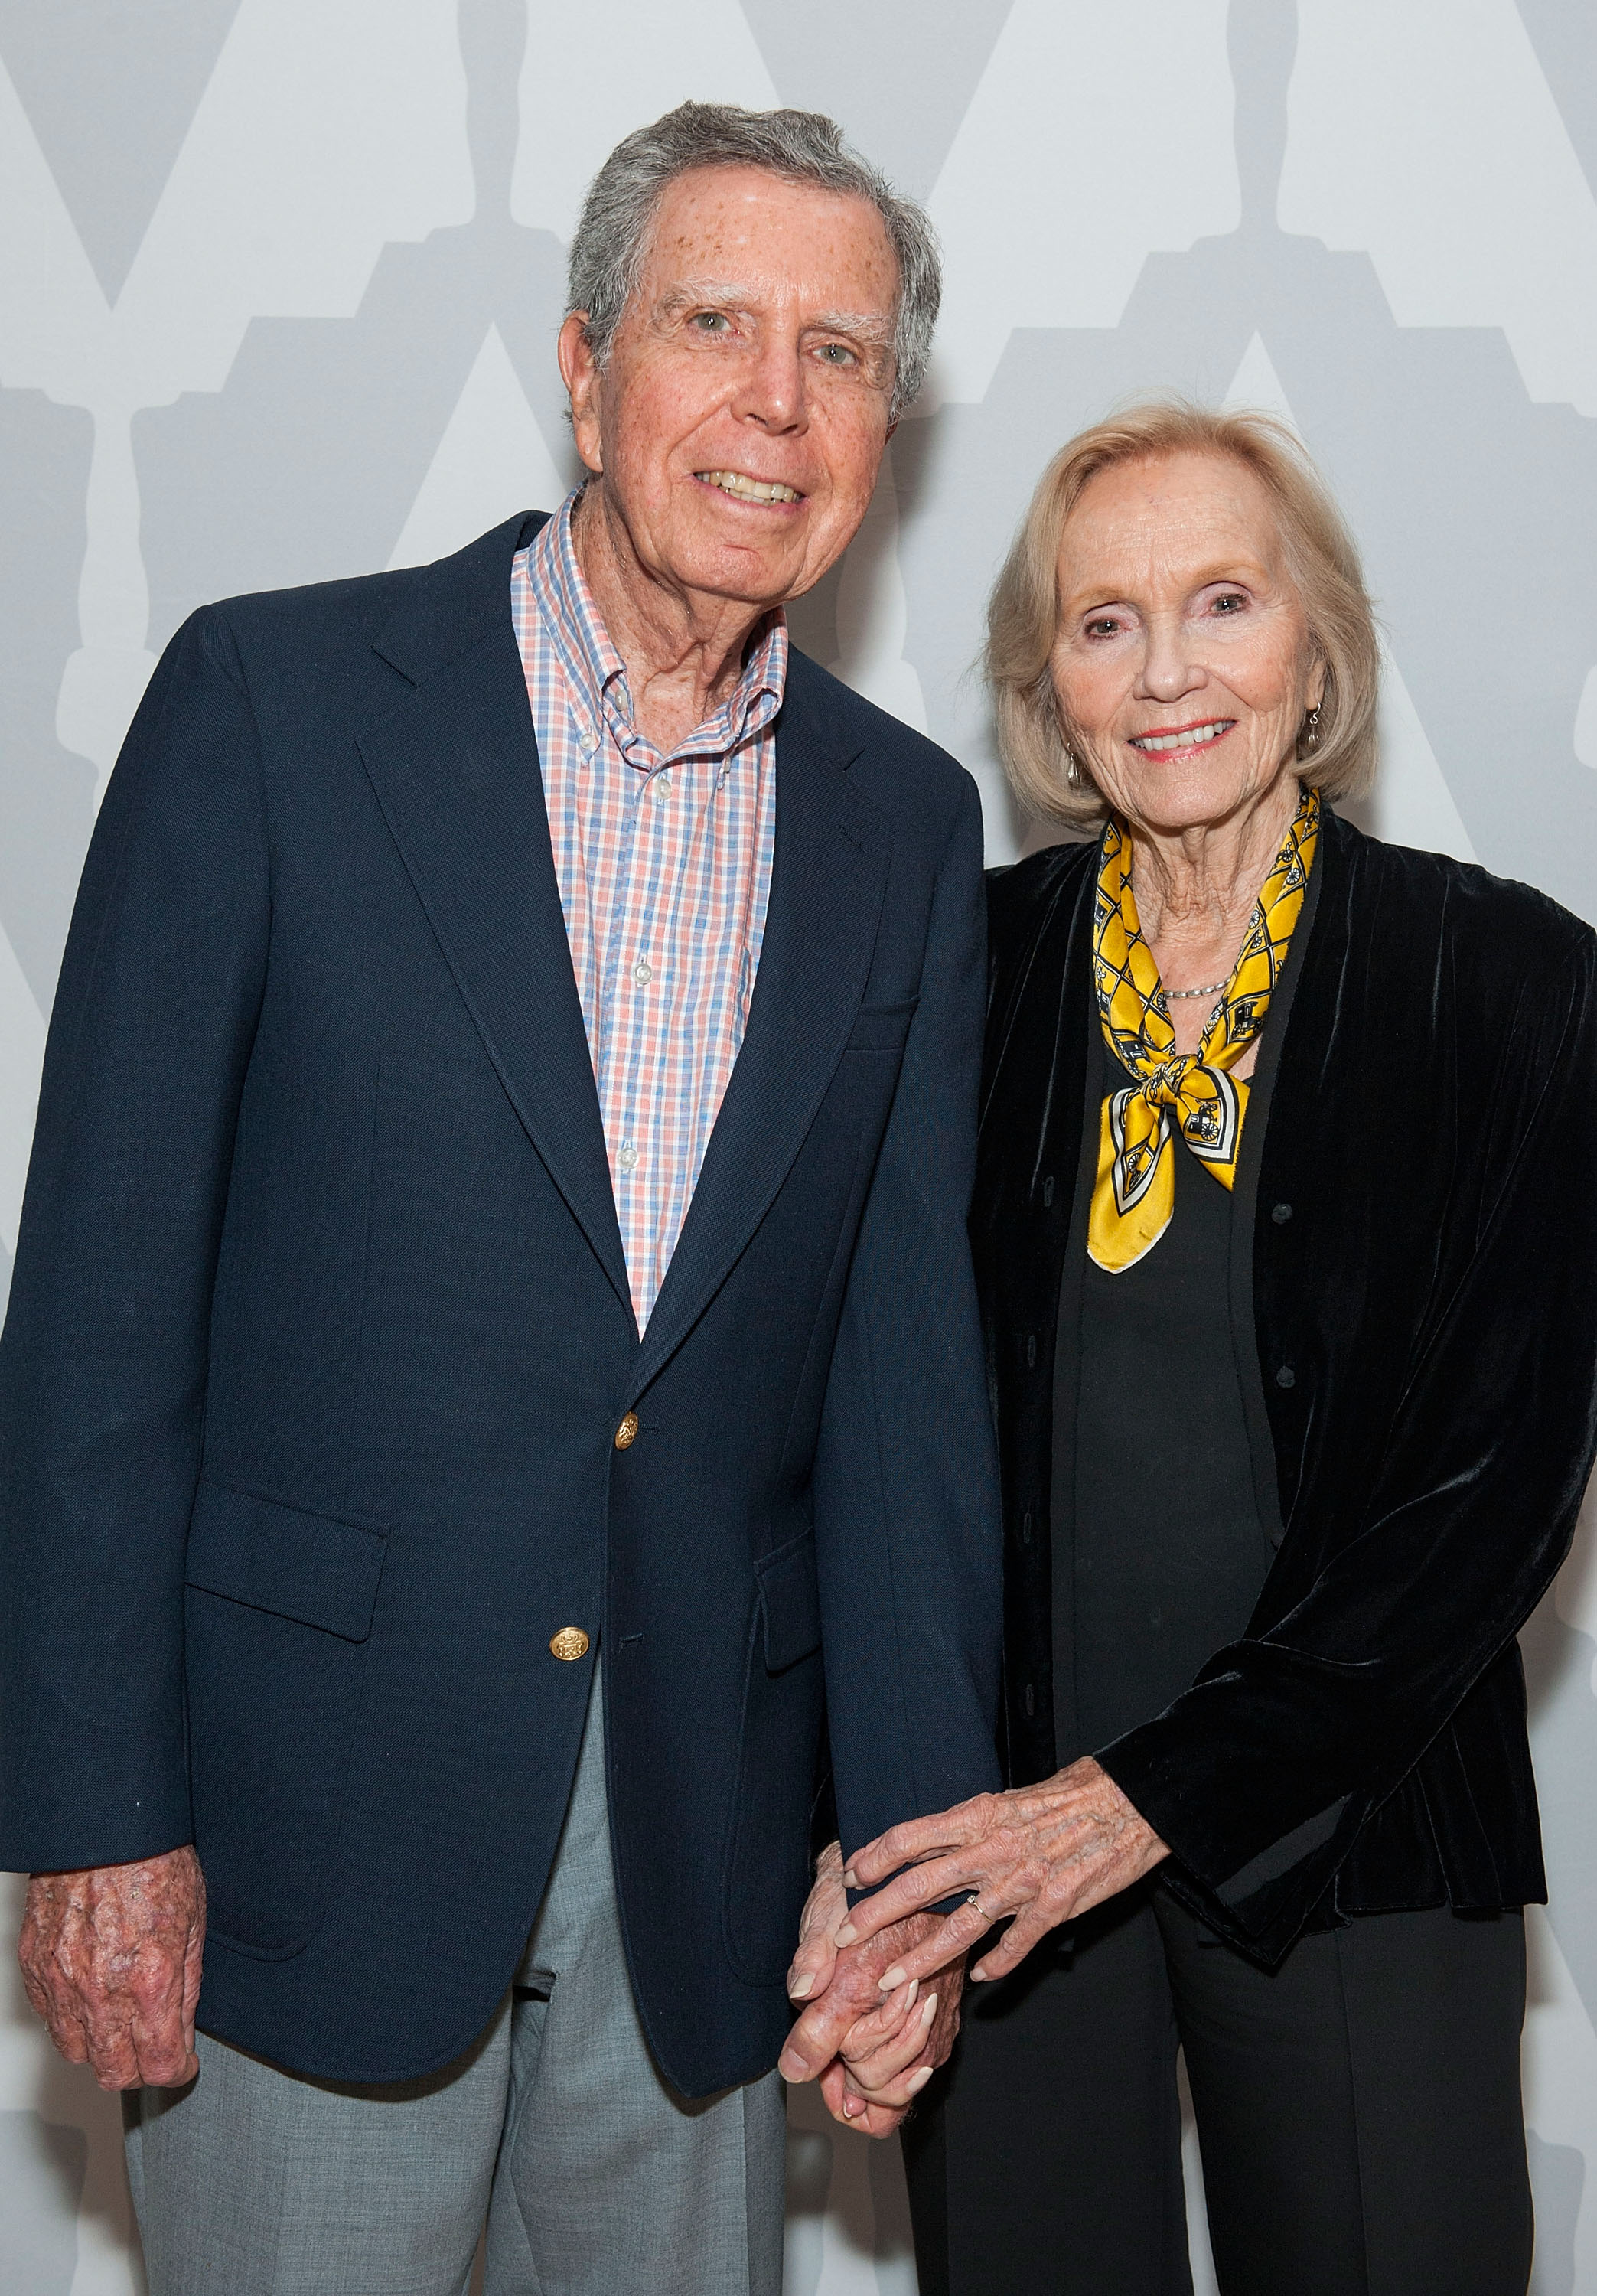 Jeffrey Hayden and Eva Marie Saint at the 60th anniversary screening of "On the Waterfront" in Los Angeles, 2014 | Source: Getty Images